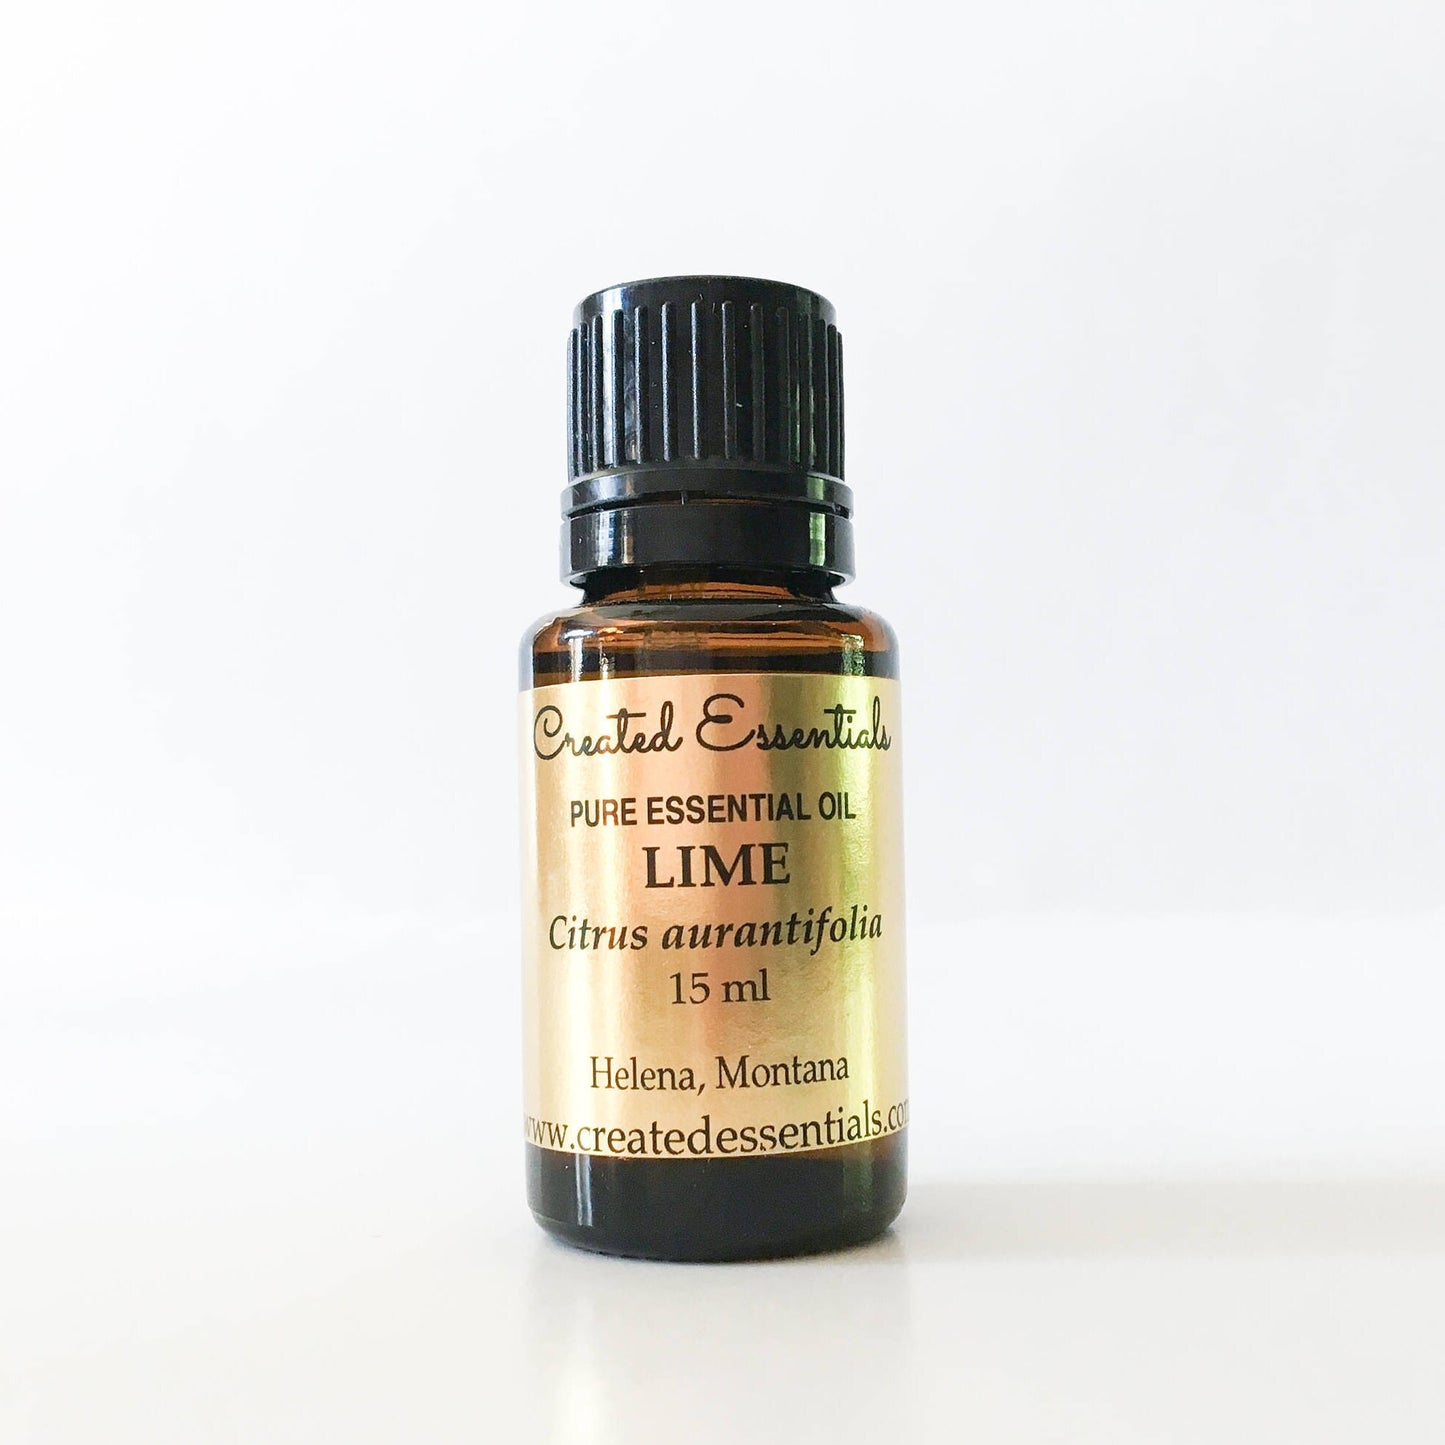 Lime Essential Oil | 100% Pure Essential Oil of Lime, Cold Pressed | Therapeutic Essential Oil of Lime | Lime Aromatherapy Oil